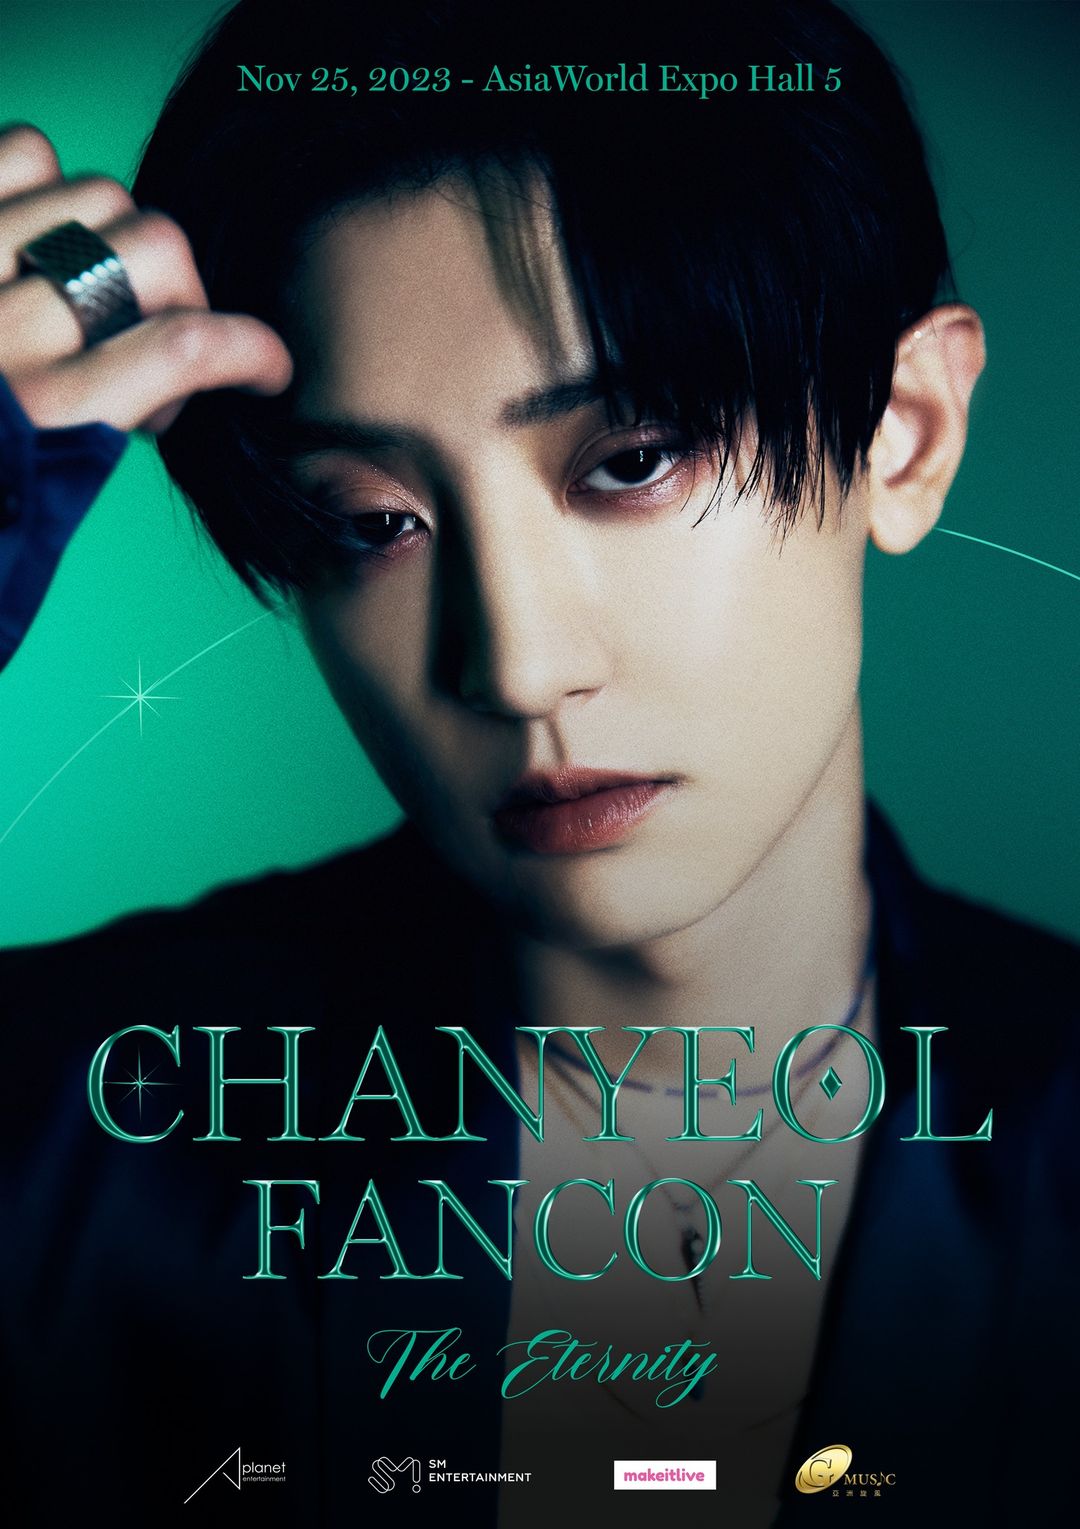 EXO’s Park Chanyeol to take over Asia for solo fancon tour “The Eternity”